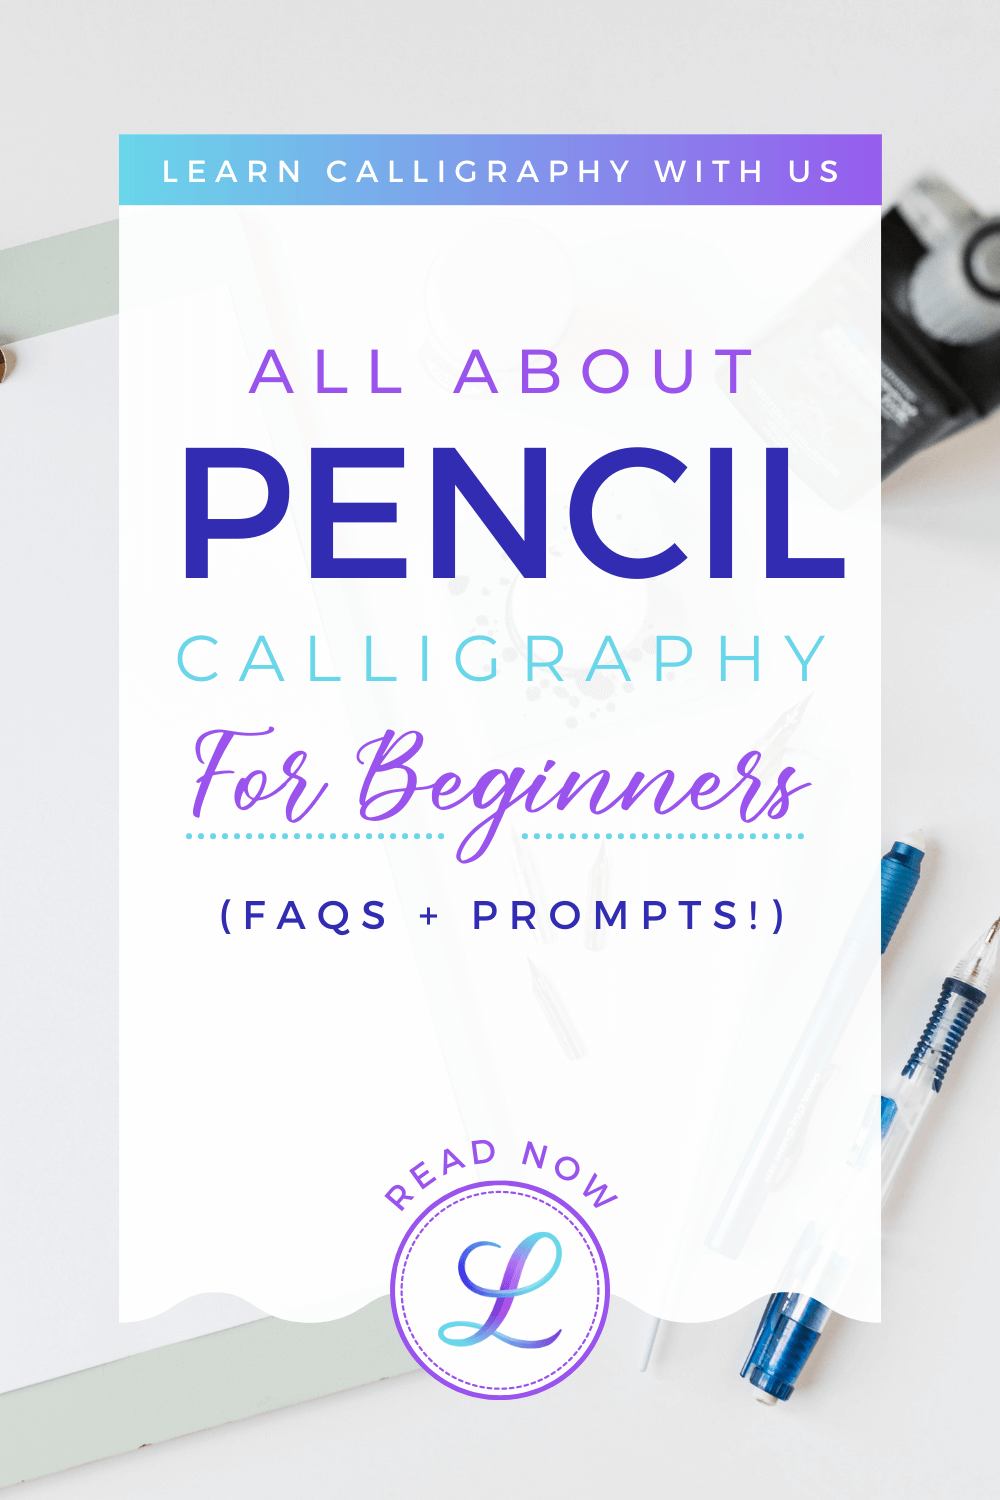 Pencil Calligraphy For Beginners: FAQs, Prompts & Worksheet